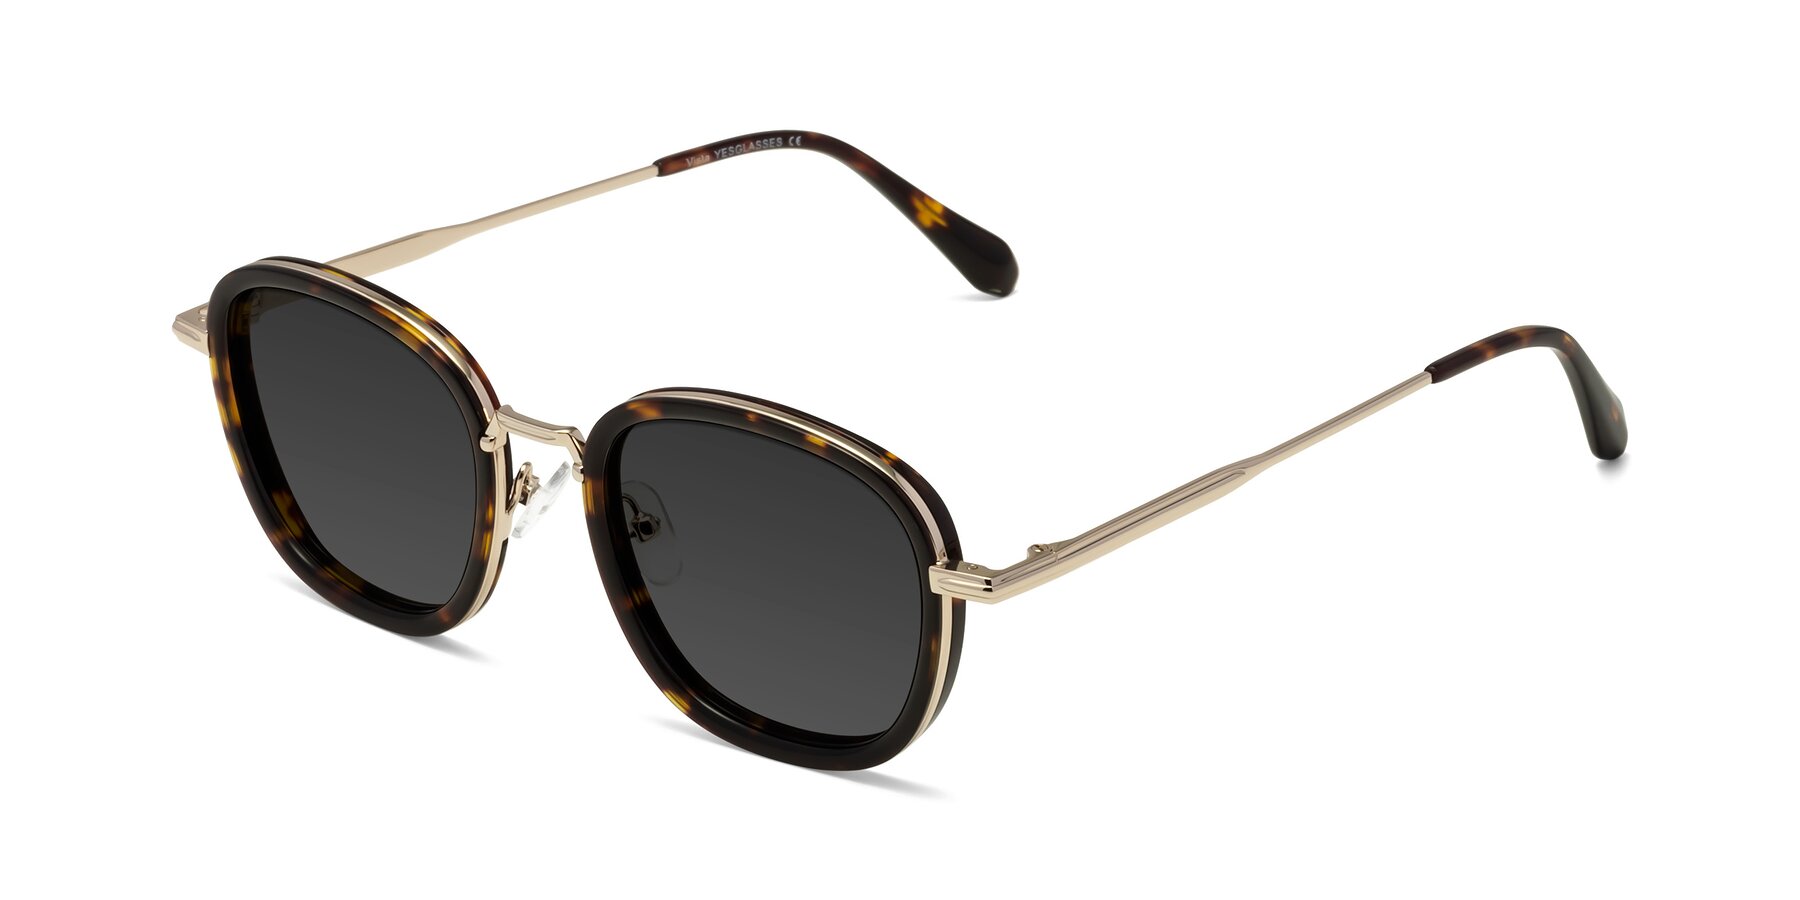 Angle of Vista in Tortoise-Light Gold with Gray Tinted Lenses